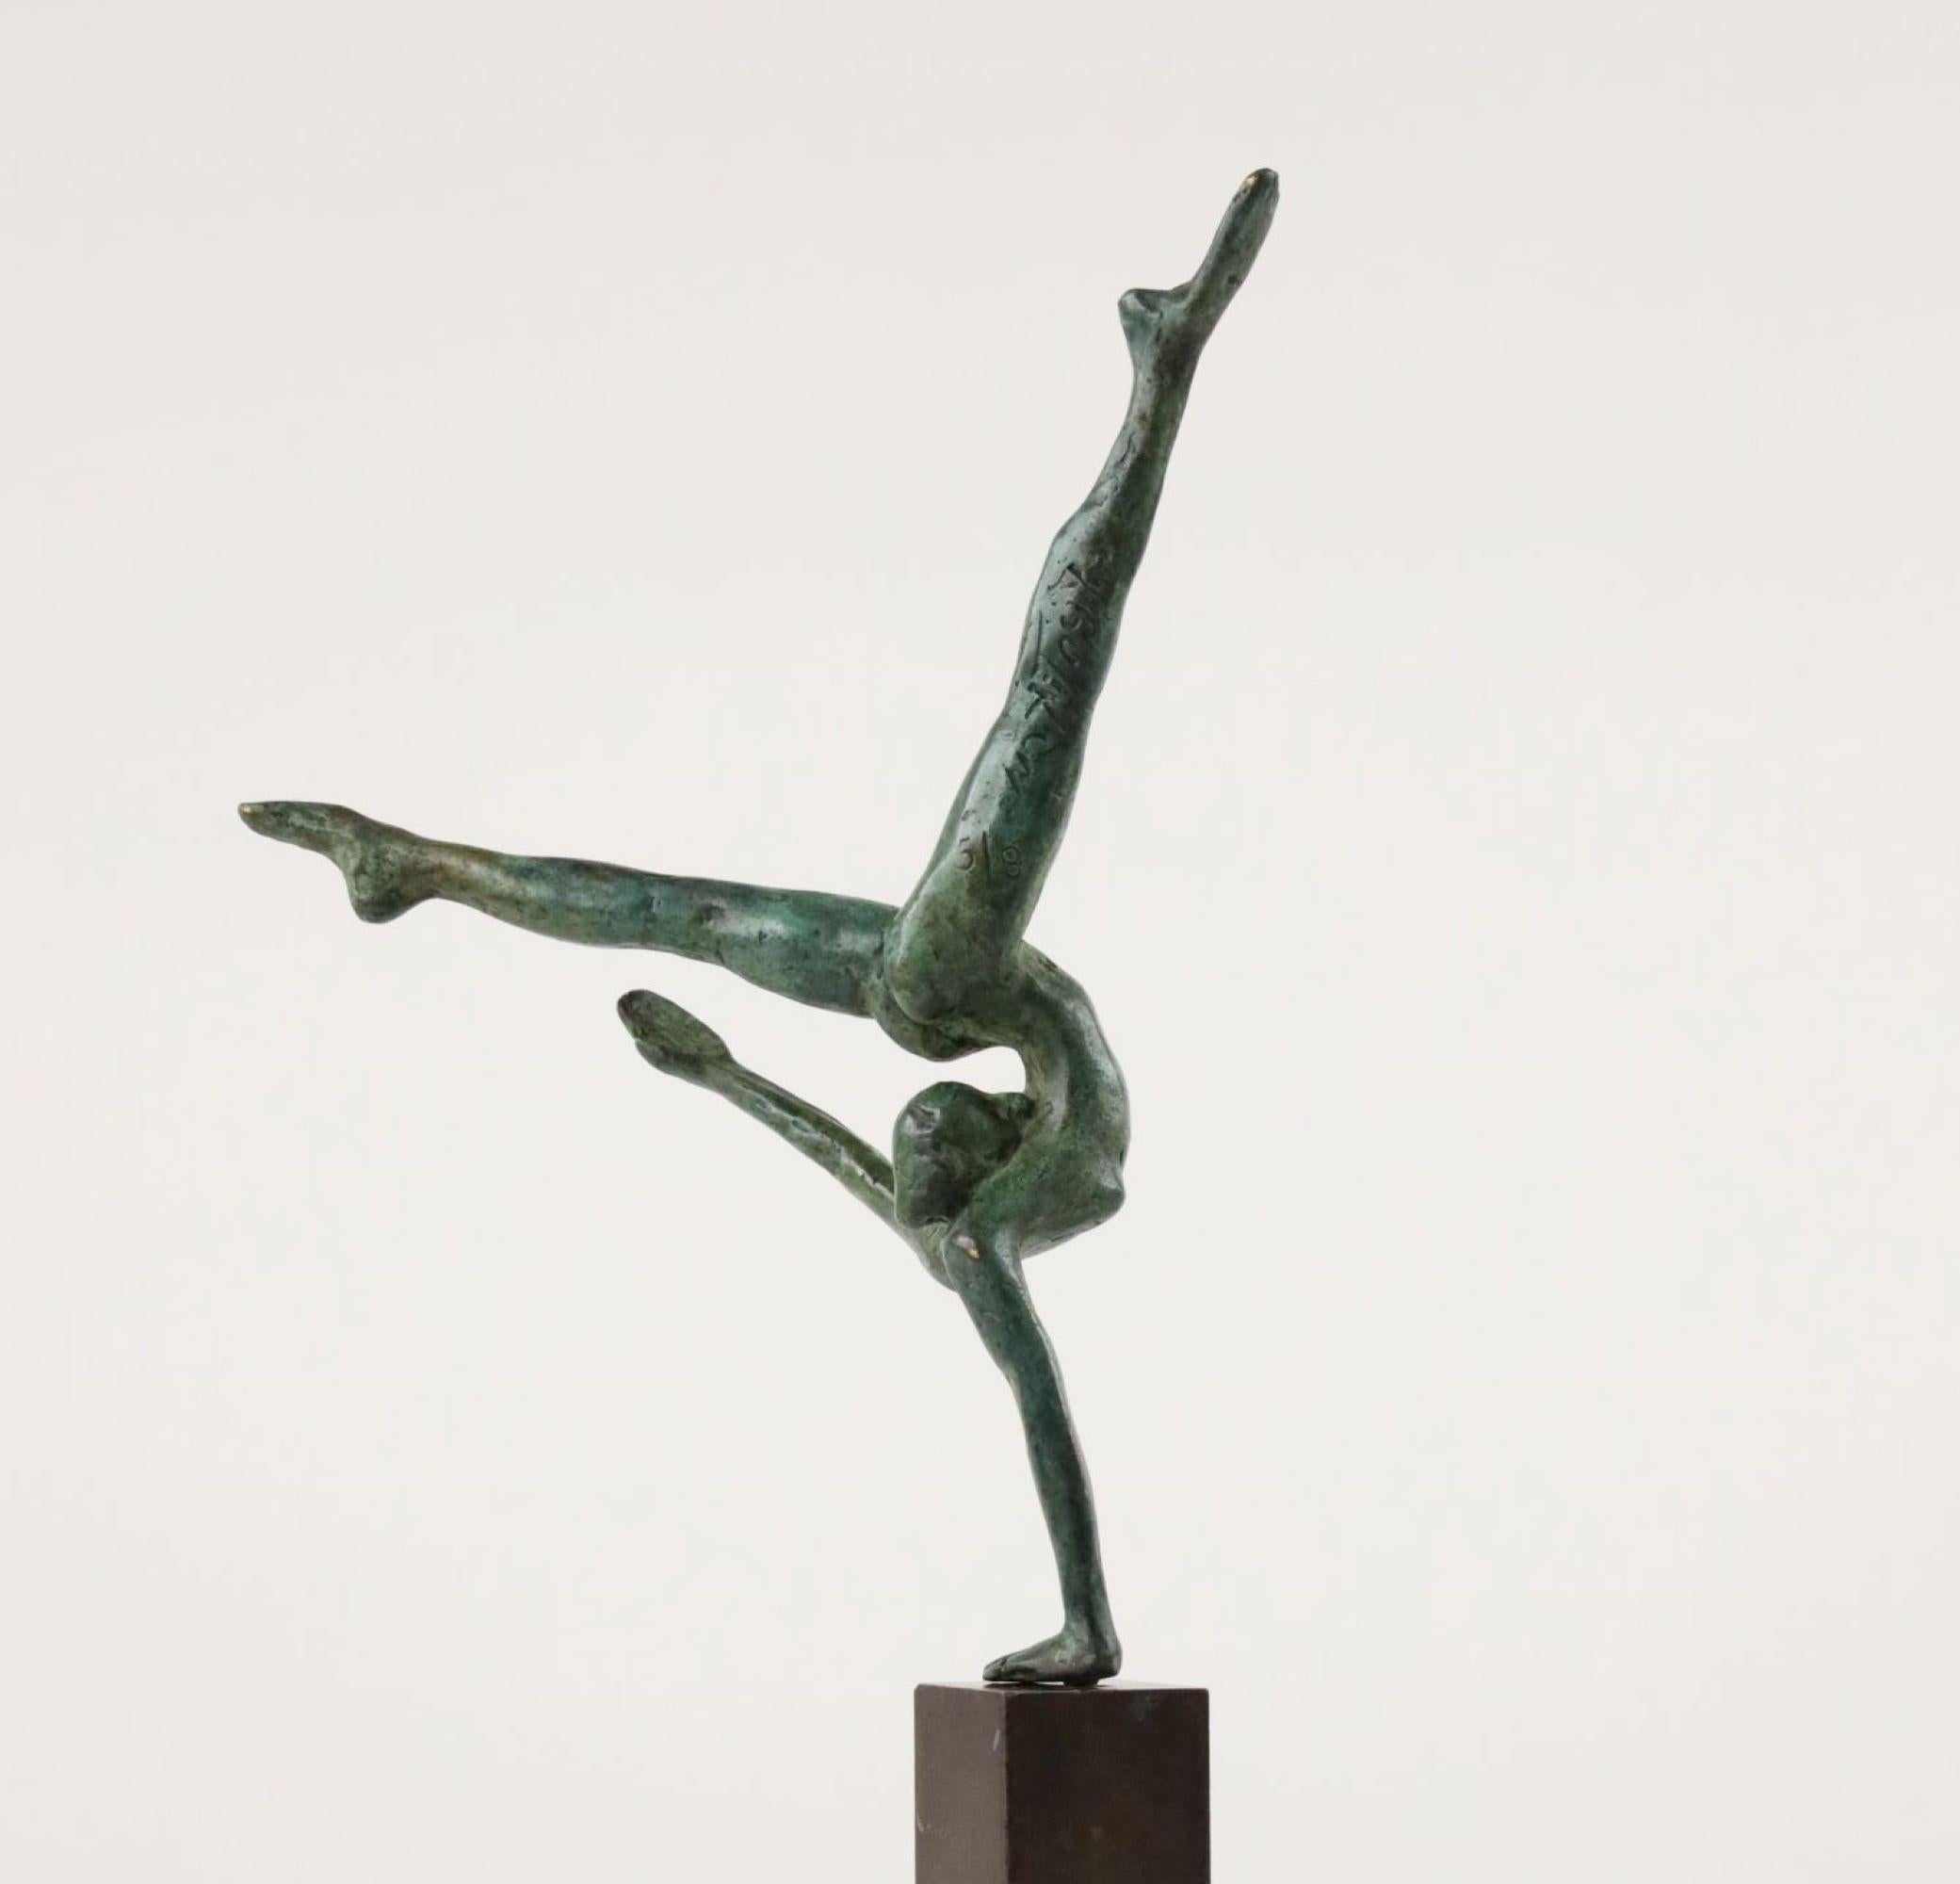 Petite Acrobate is a bronze sculpture by contemporary artist Yann Guillon, dimensions are 19 × 16 × 4 cm (7.5 × 6.3 × 1.6 in). Dimensions of the metal base: 11 x 8 x 8 cm (4,3 x 3,1 x 3,1 in). Height of the sculpture with the metal base: 30 cm (11,8